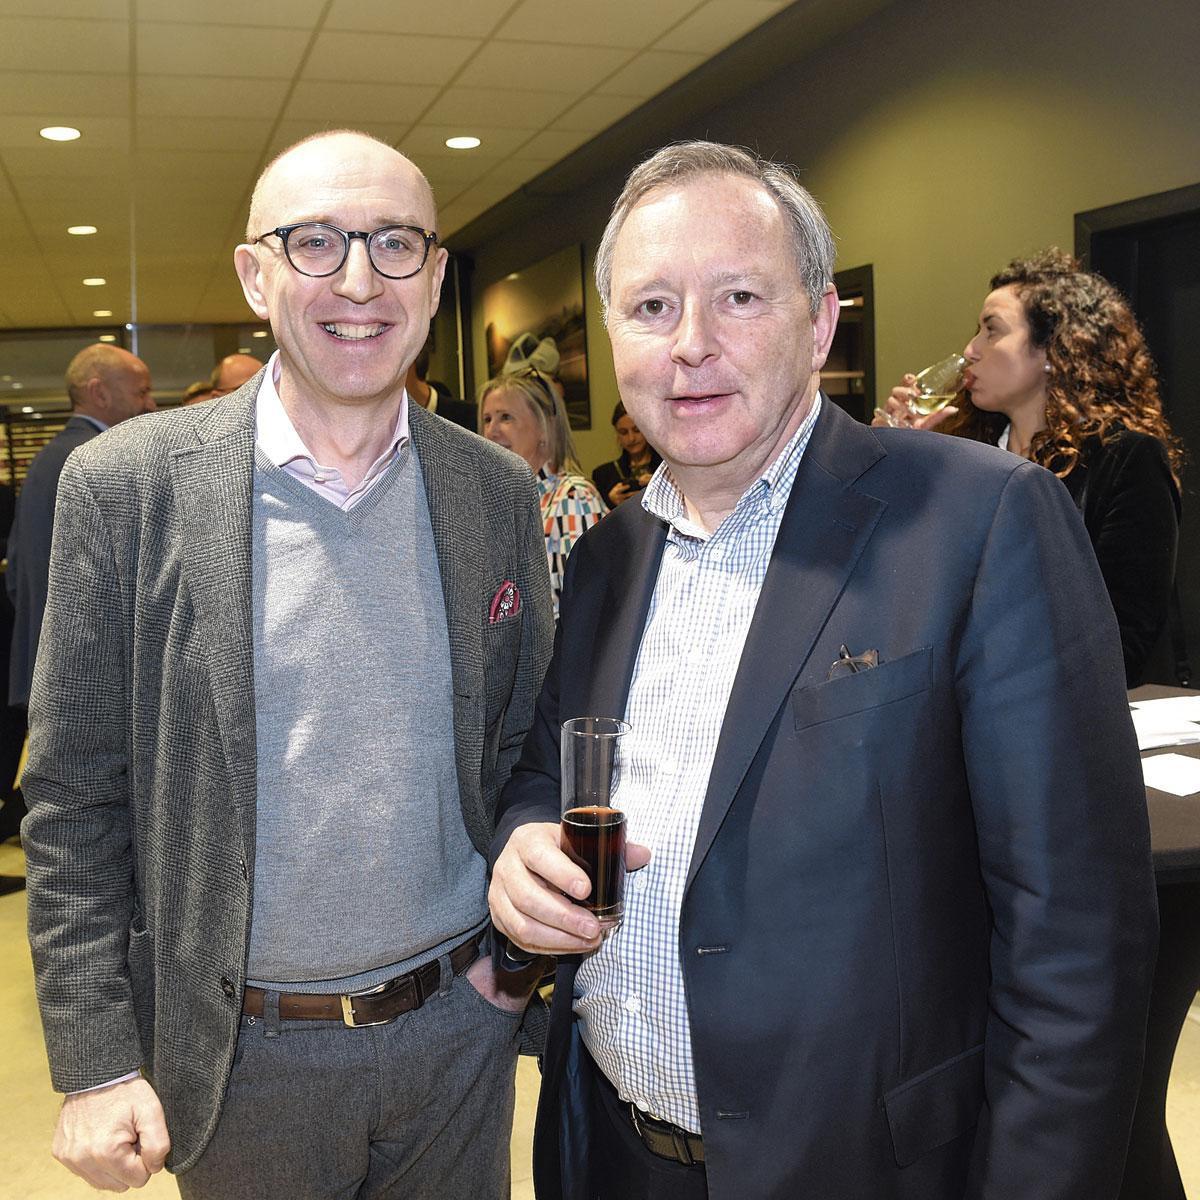 Philippe van Boxmeer, legal interim manager chez Ansell and Atradius Collections, et Thierry Janssen, CEO de Switch.